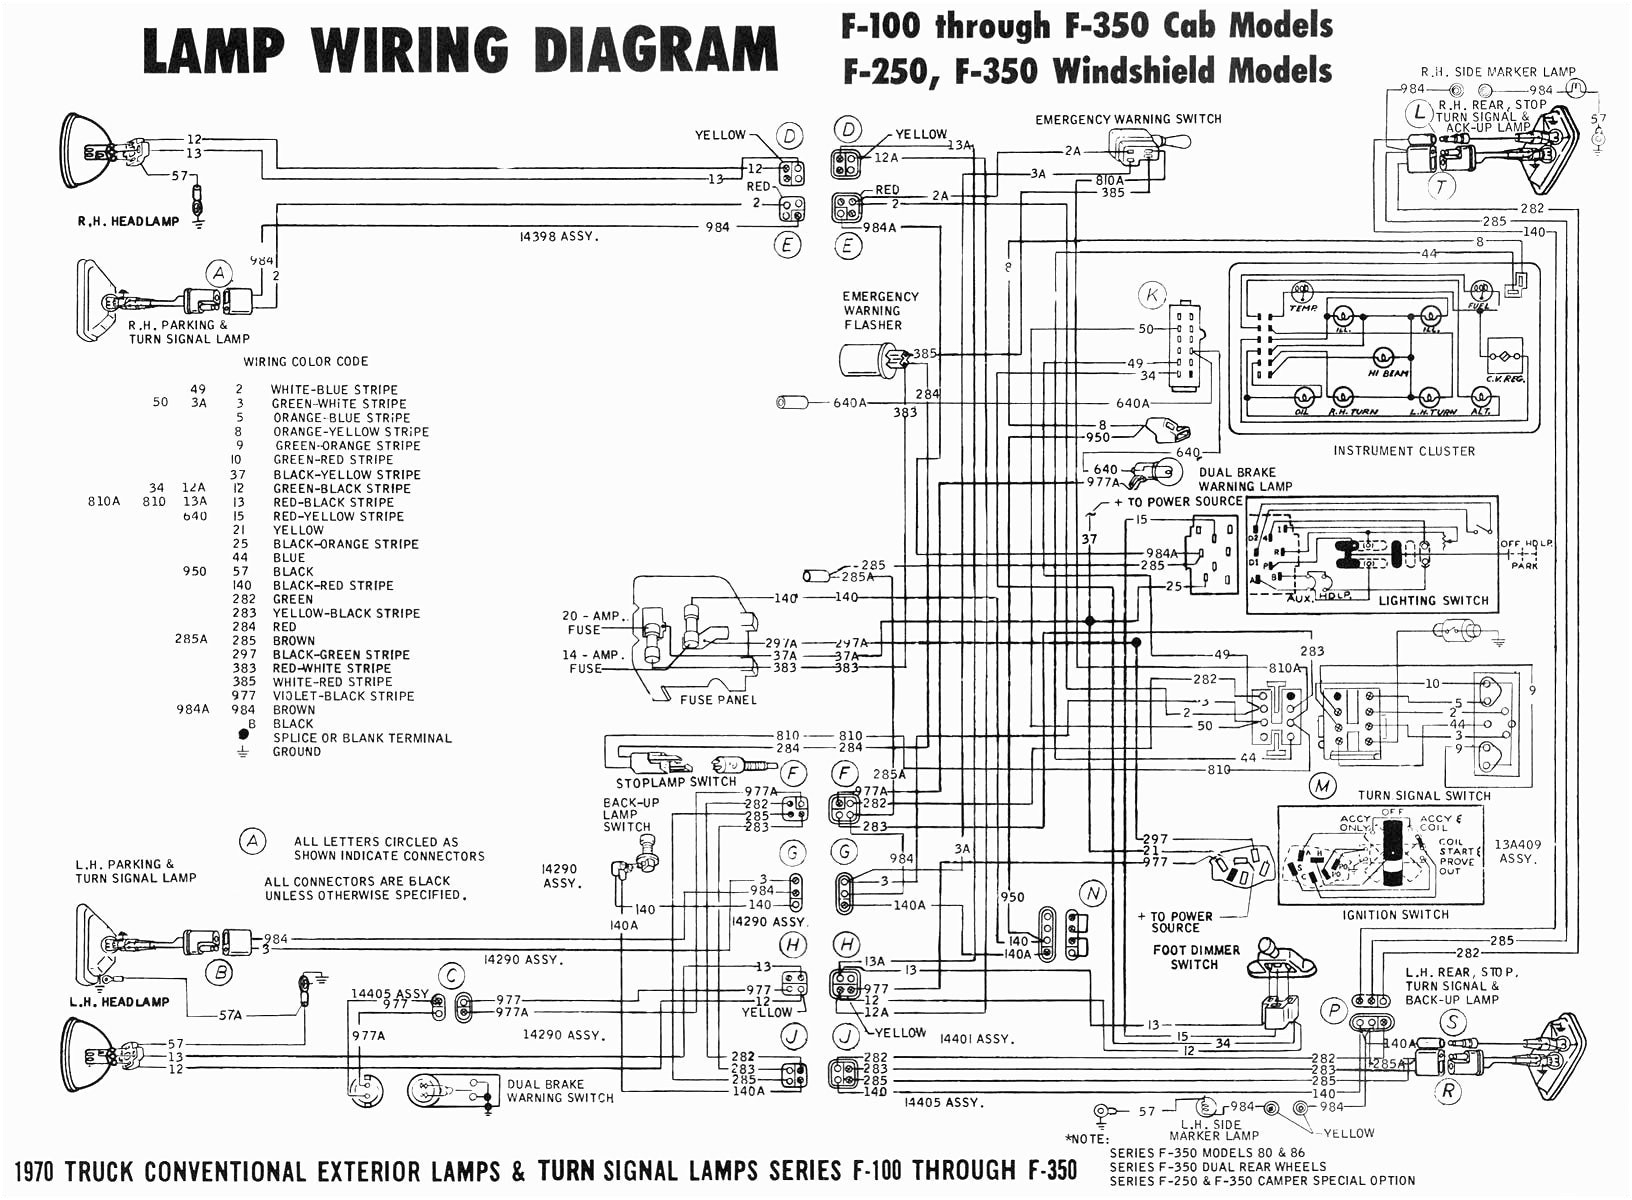 wiring diagram pigtails for automotive wiring diagram details wiring diagram pigtails for automotive